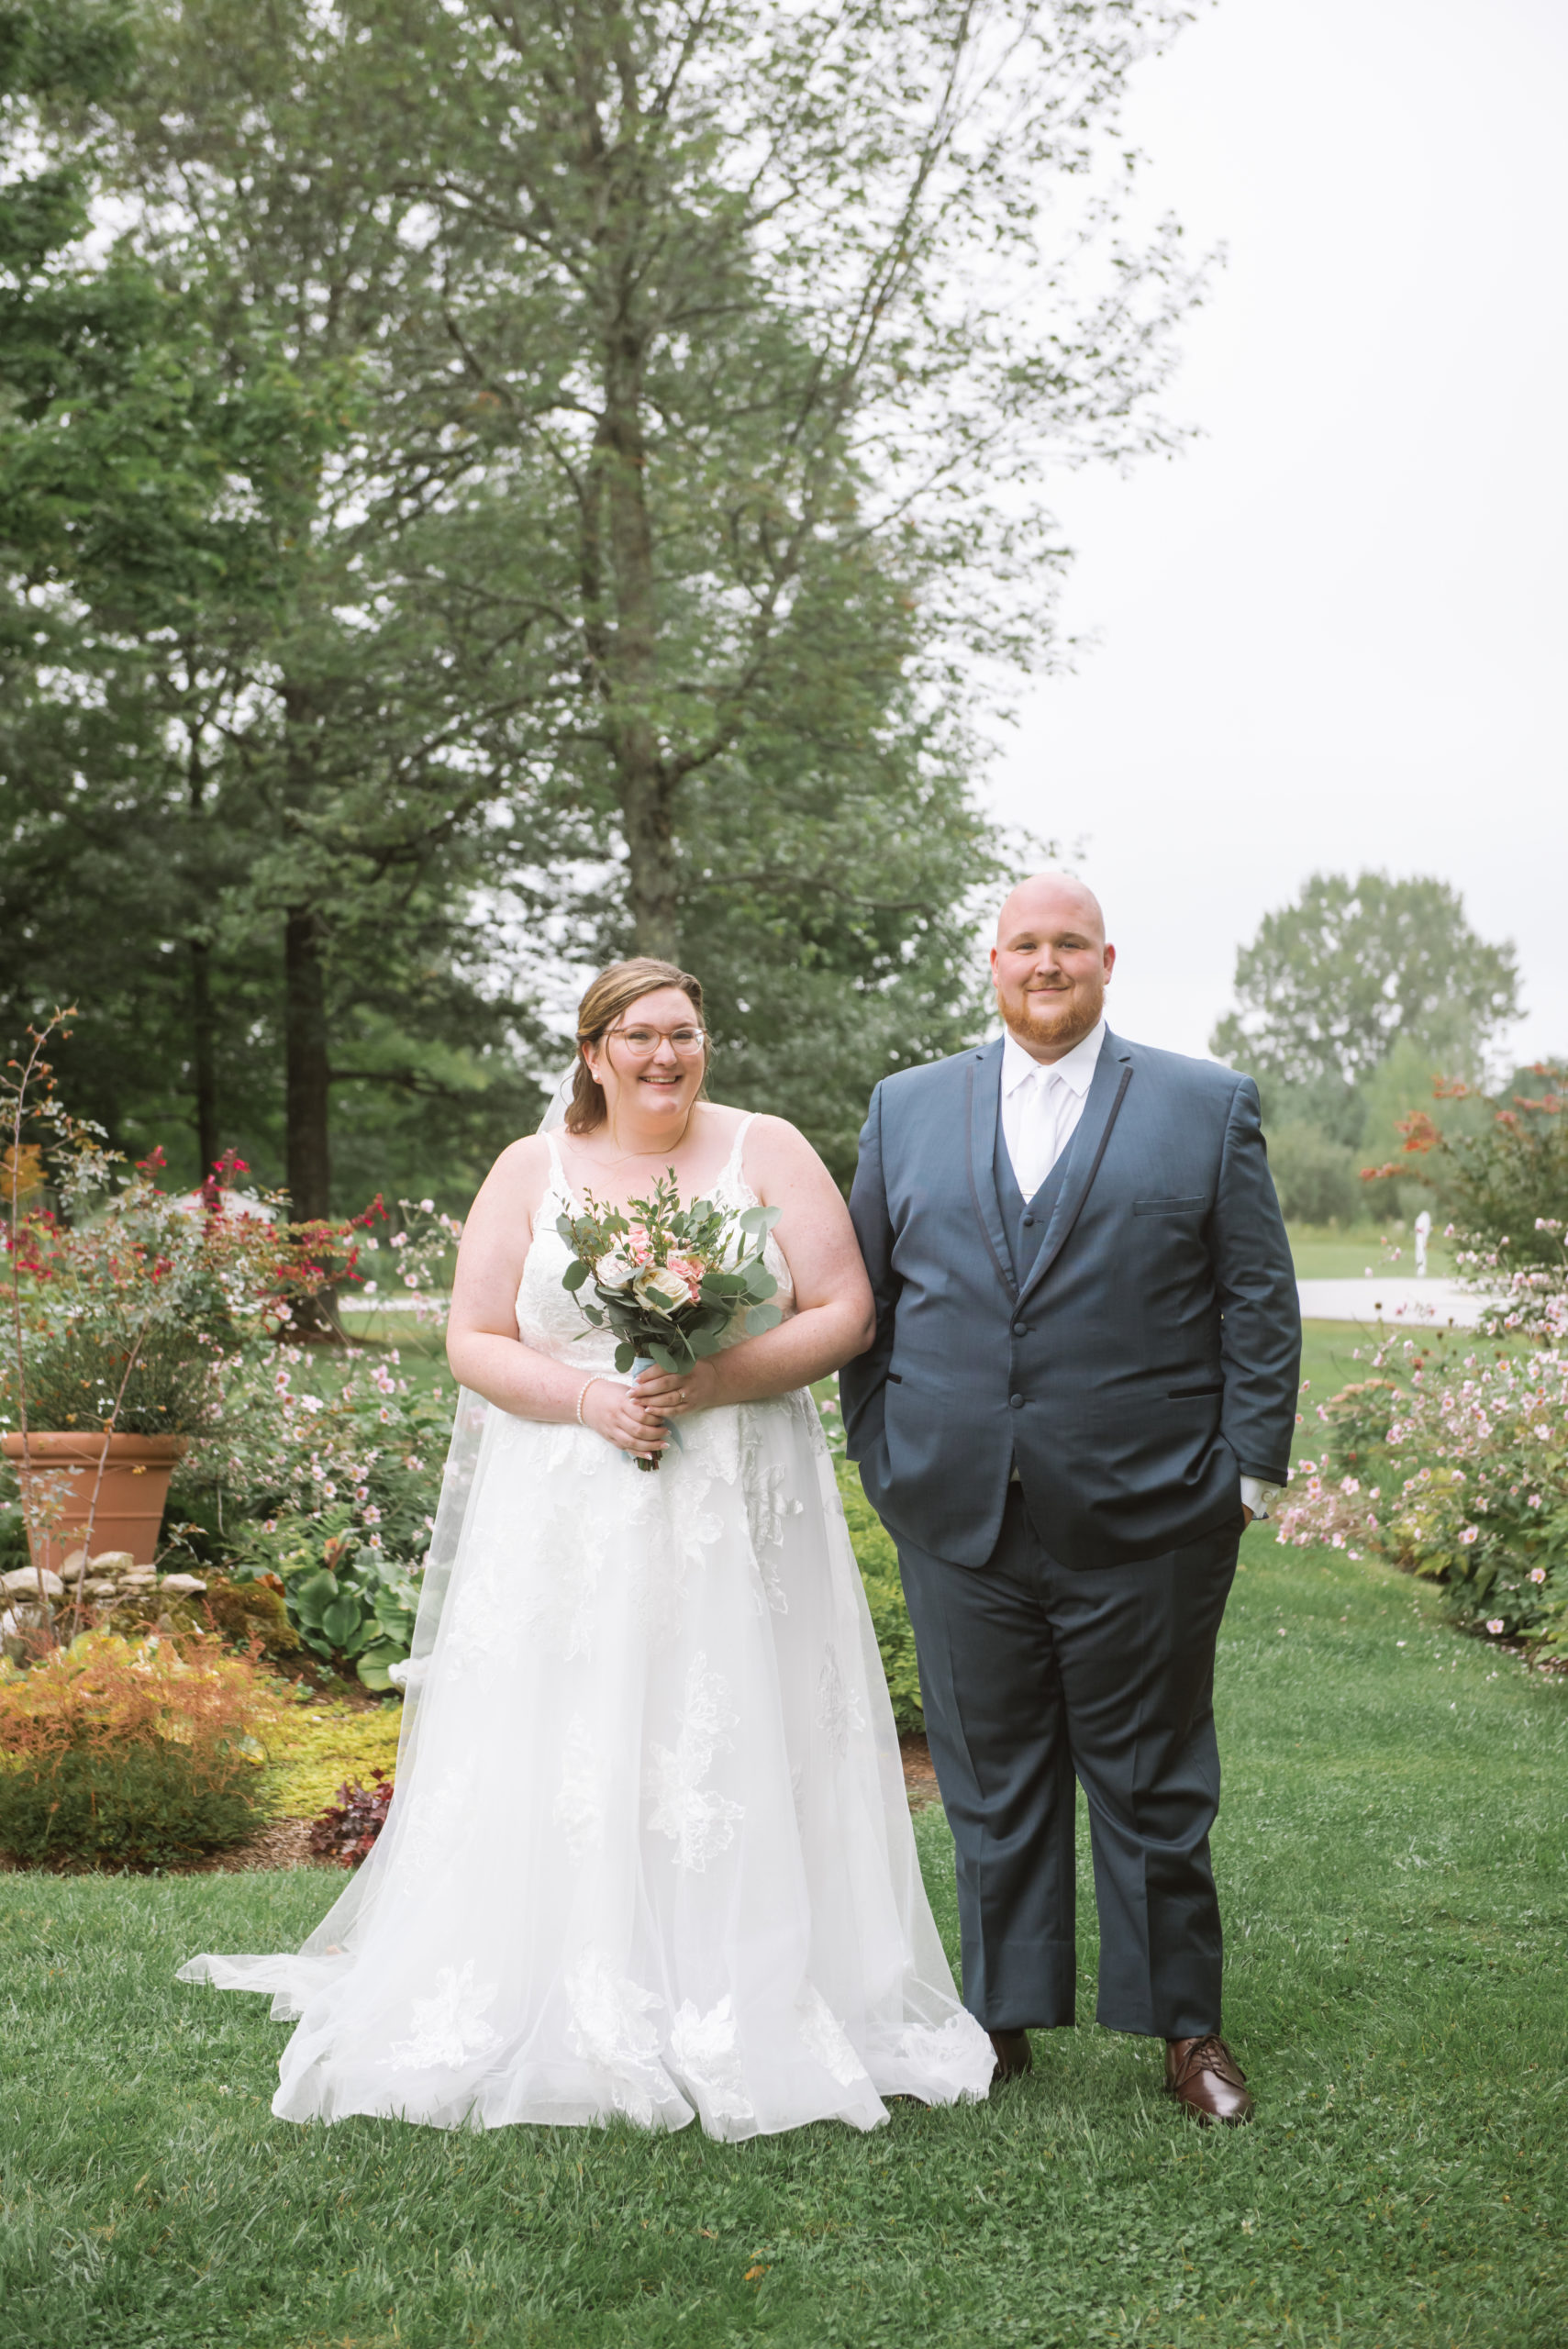 Bride and groom standing side by side in a garden. They are both standing facing the camera and have soft smiles. She is holding her bouquet in front of her. He has both hands in his pockets.  She is wearing a long white lace gown with a long veil and he is wearing a blue suit with a white tie. 